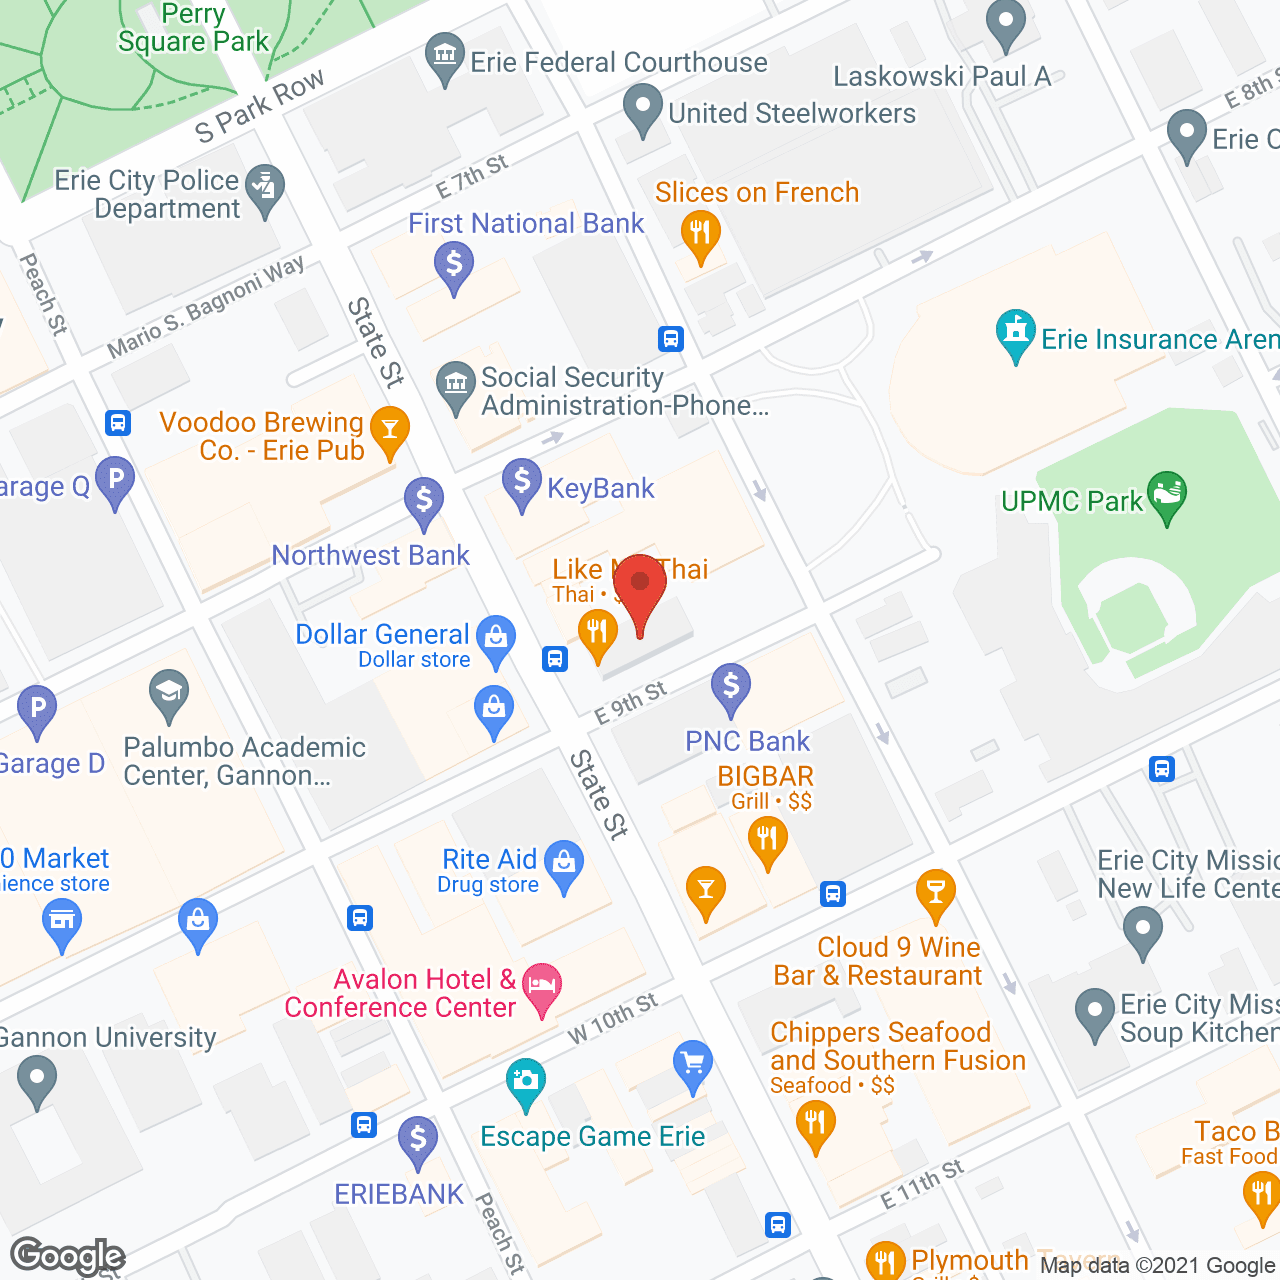 Mid City Towers in google map